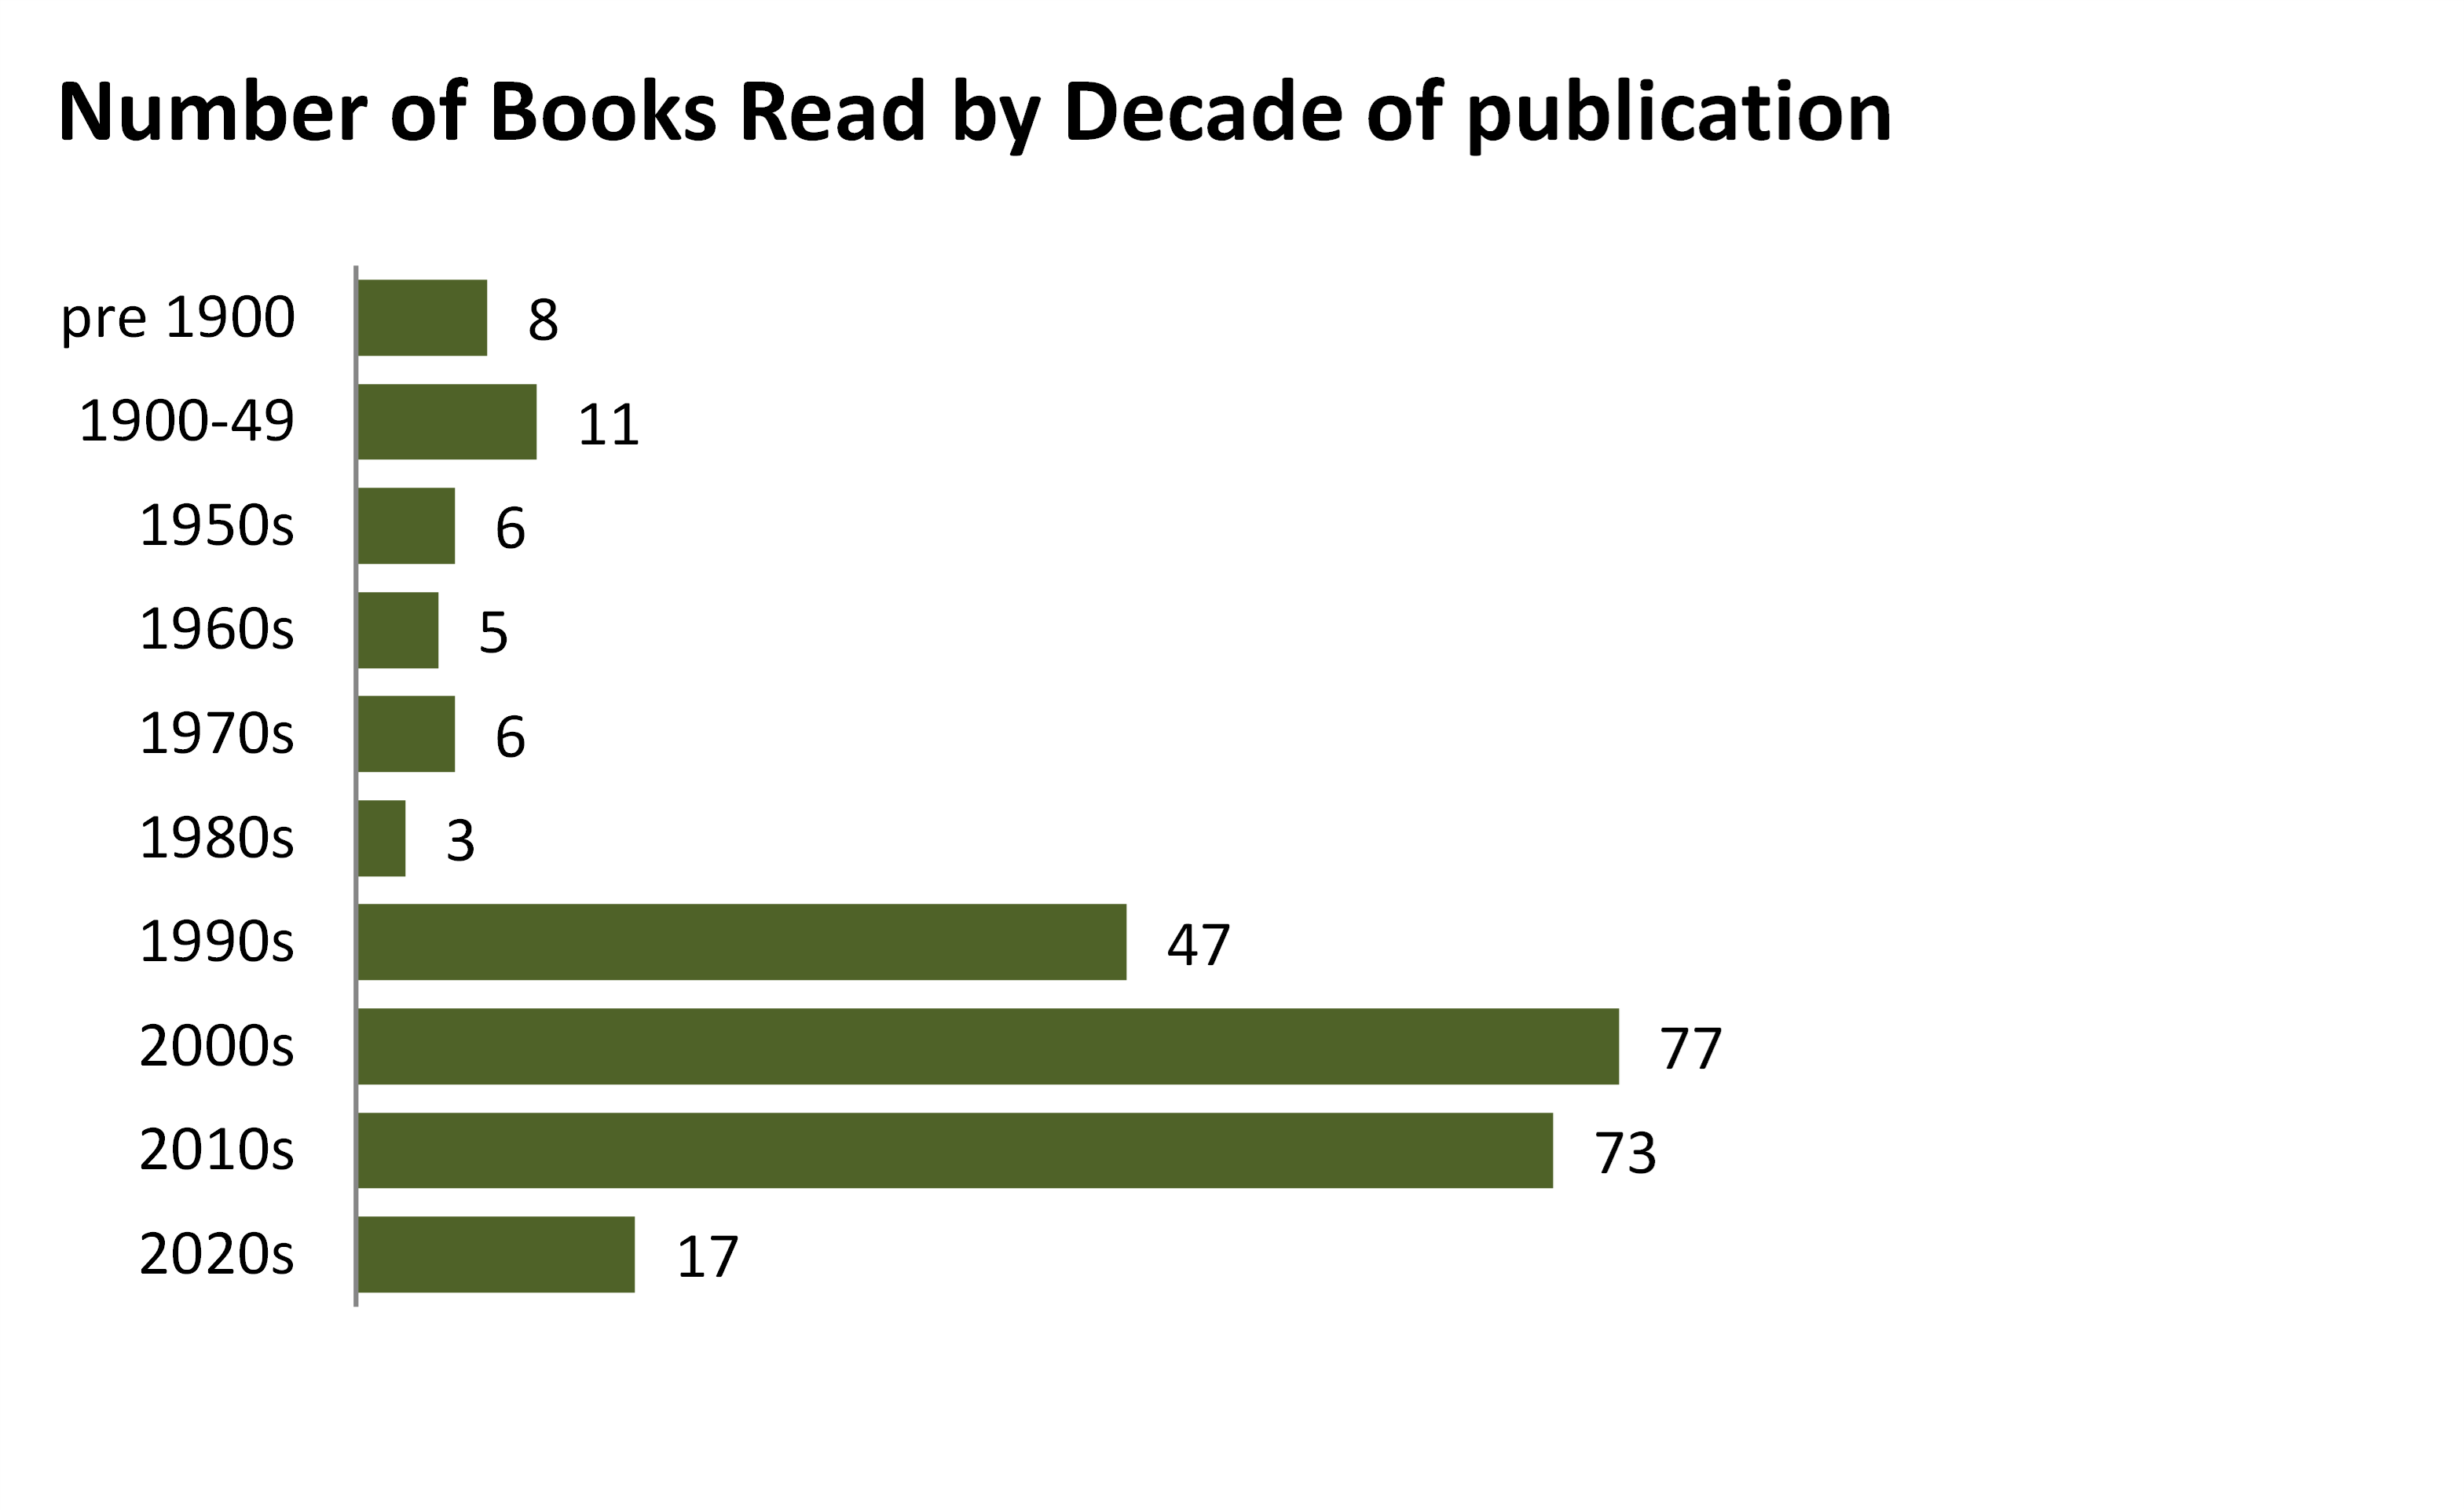 age of the book at the time of reading